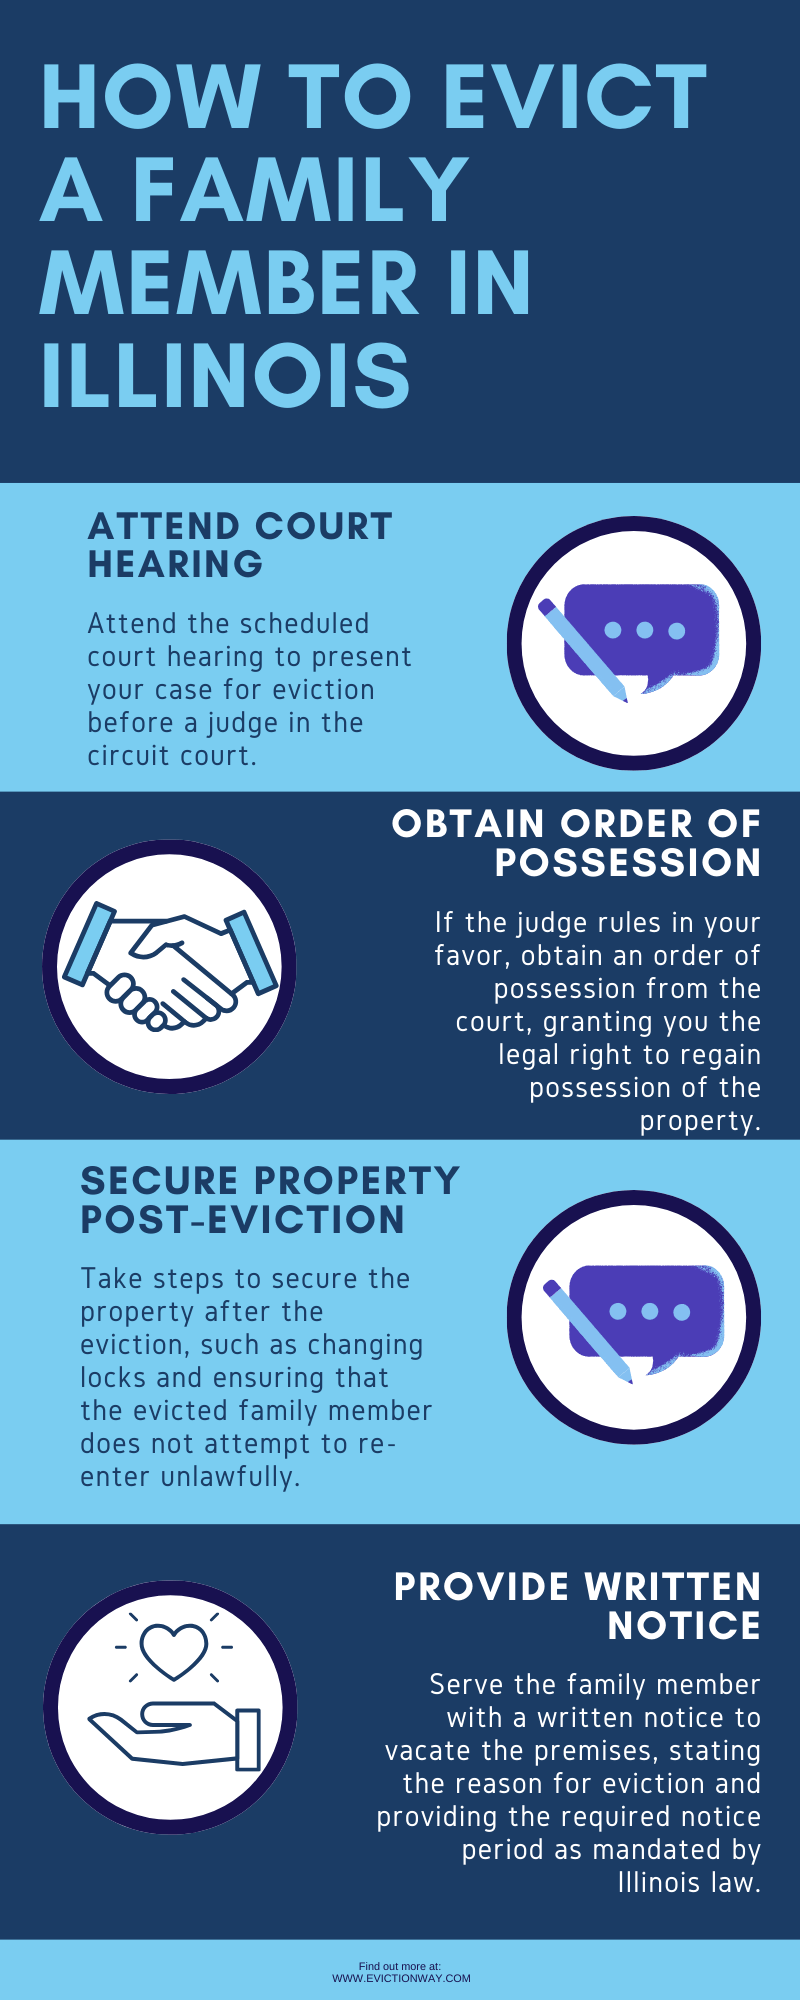 How to Evict a Family Member in Illinois